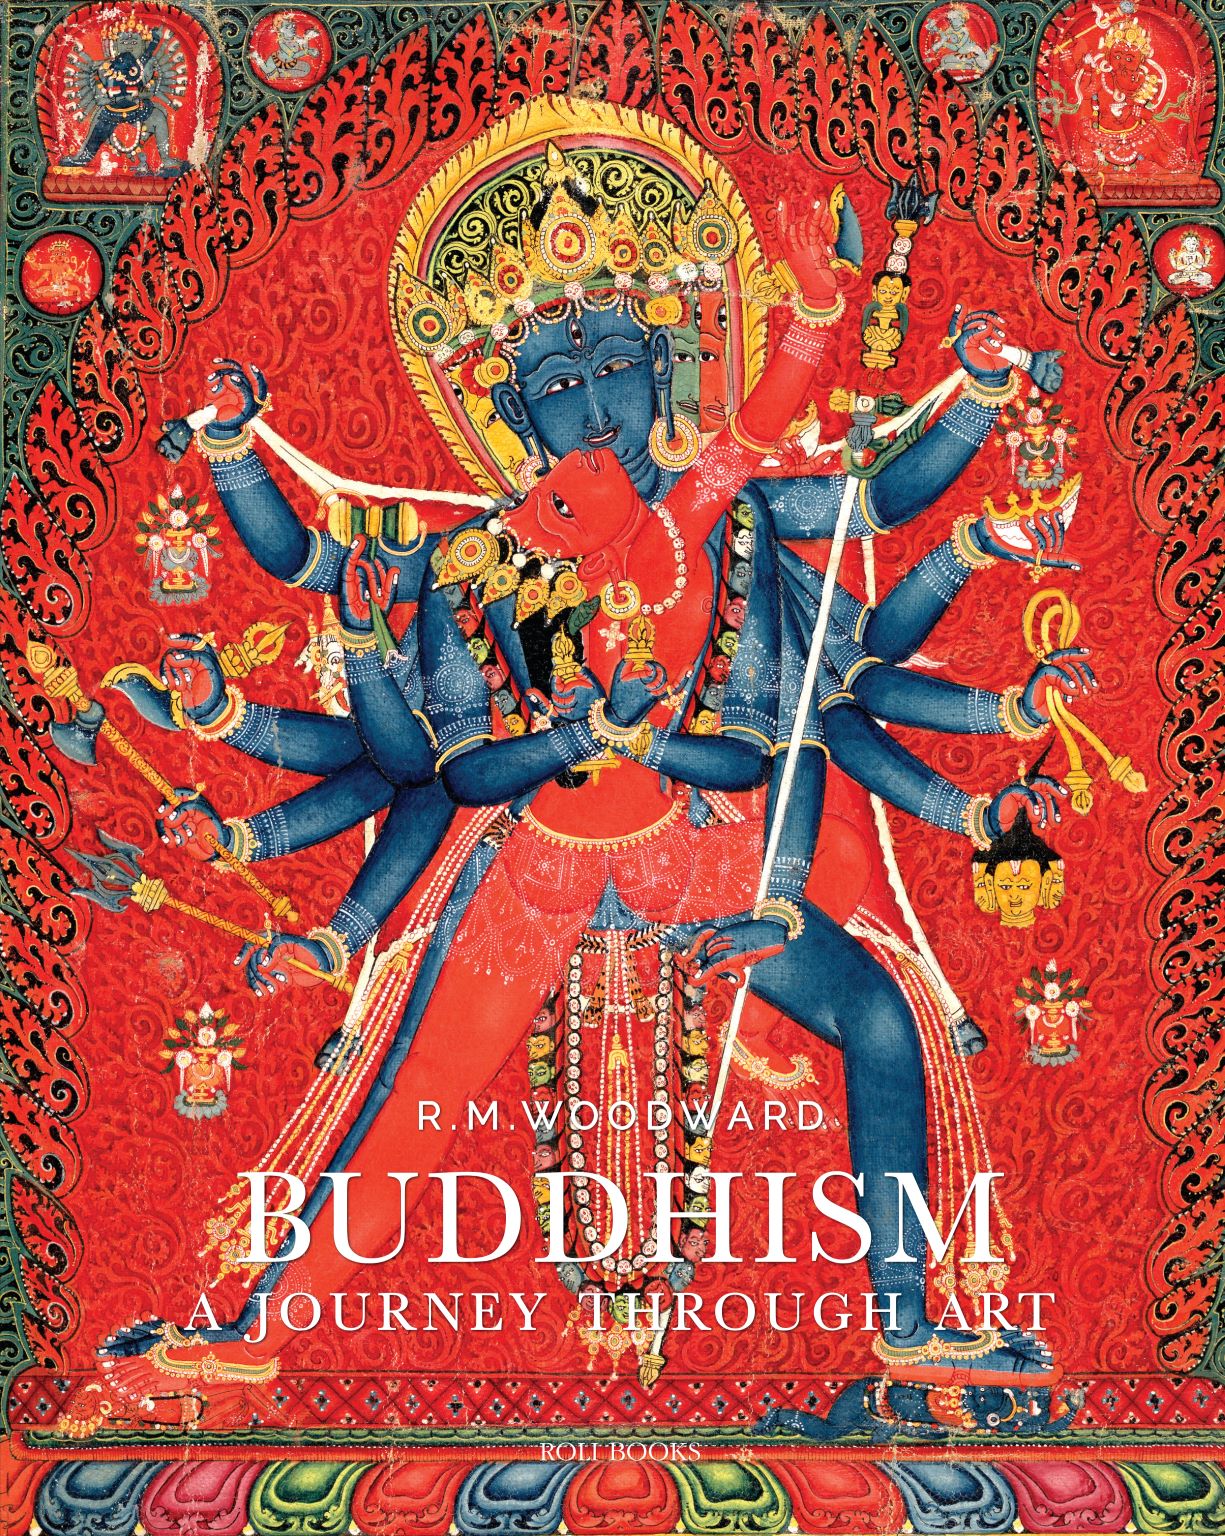 Art of buddhism front cover jpg